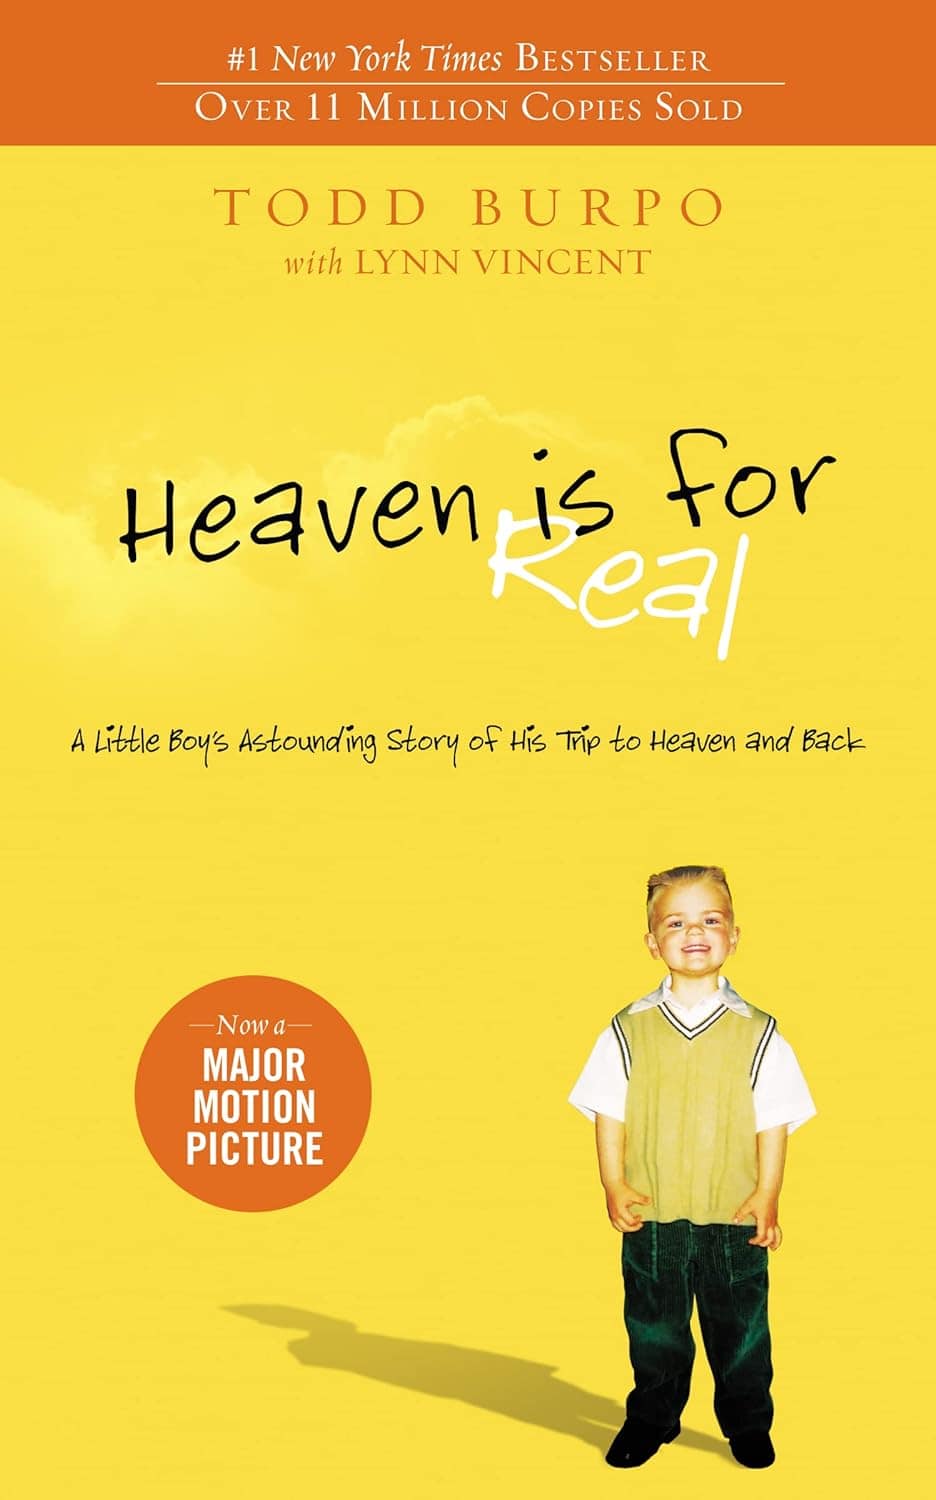 Heaven is for Real A Little Boy’s Astounding Story of His Trip to Heaven and Back by Todd Burpo